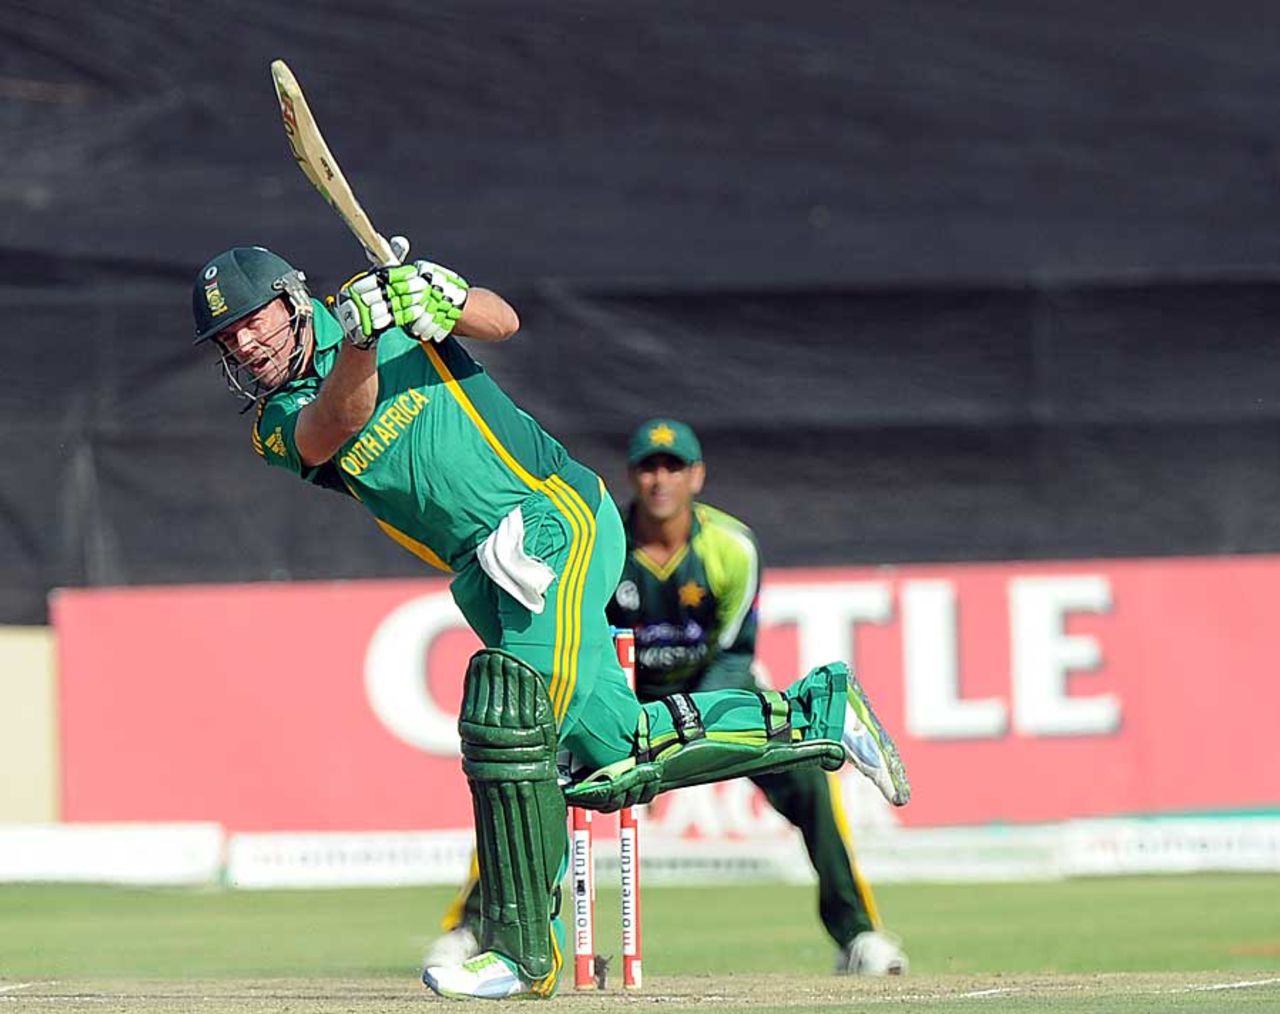 AB de Villiers counterattacked even as wickets fell at the other end, South Africa v Pakistan, 5th ODI, Benoni, March 24, 2013